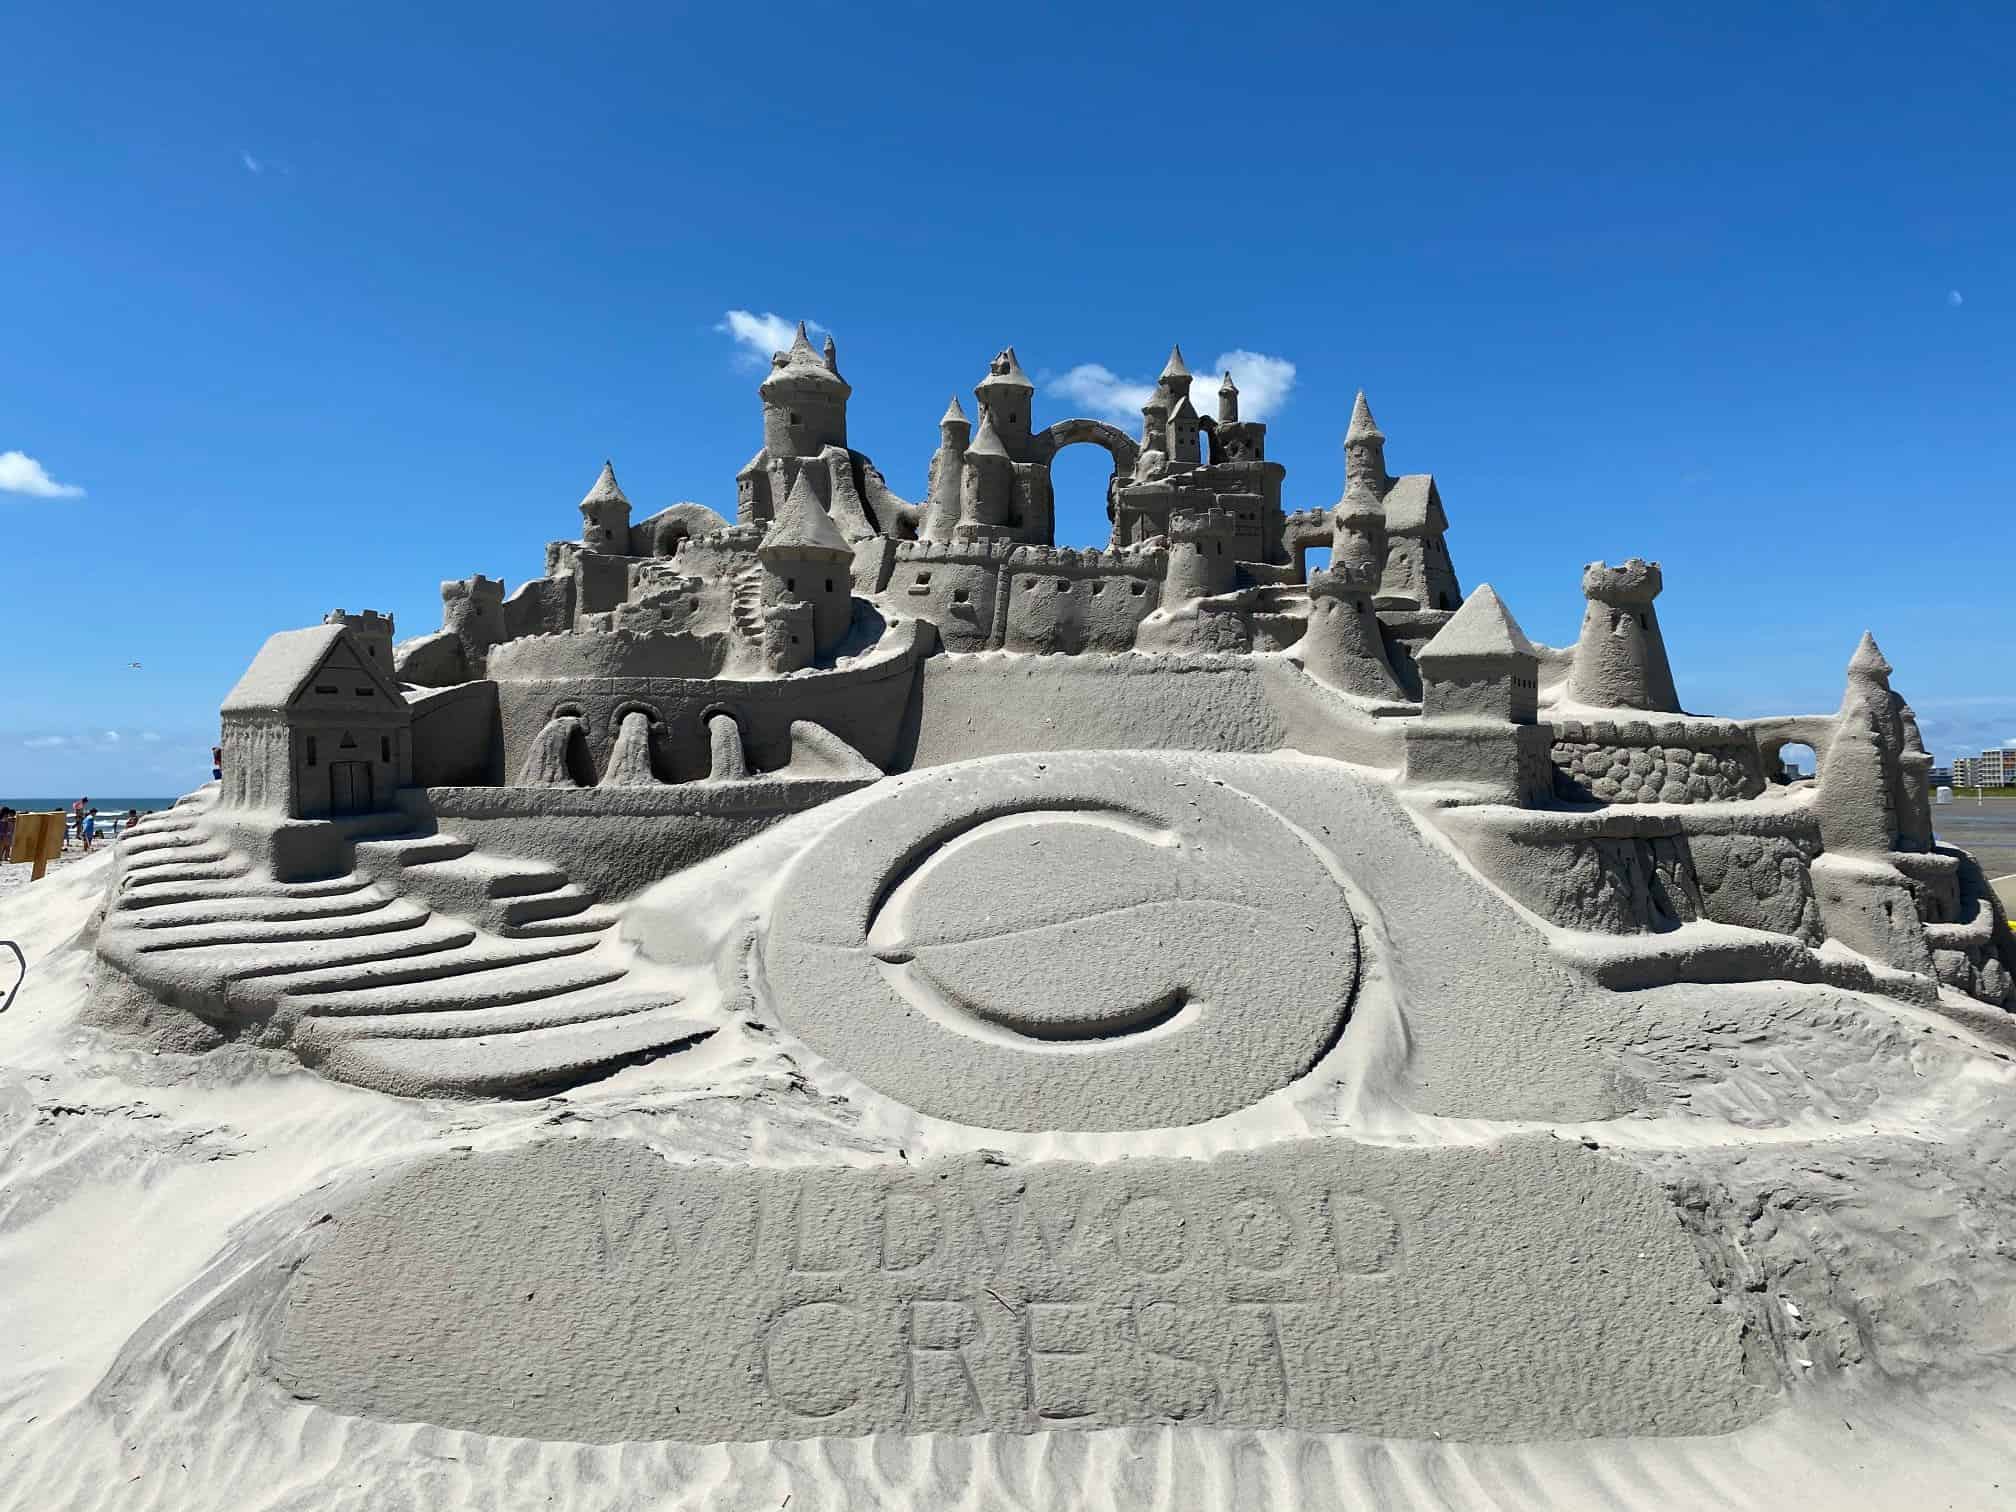 Wildwood Crest Sand Sculpting Festival Photos and Videos